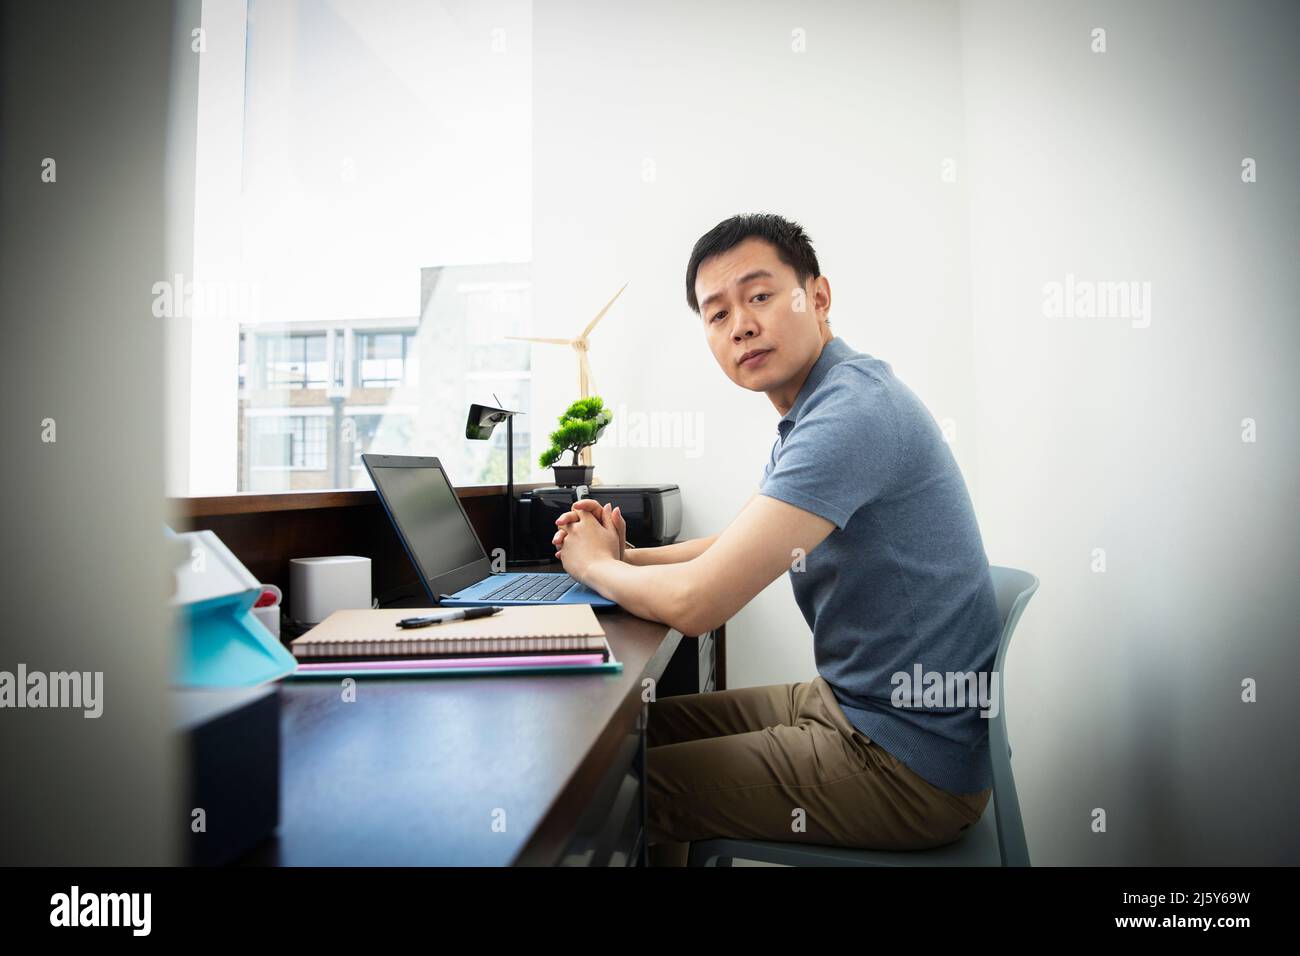 Portrait confident male engineer working at laptop in office Stock Photo